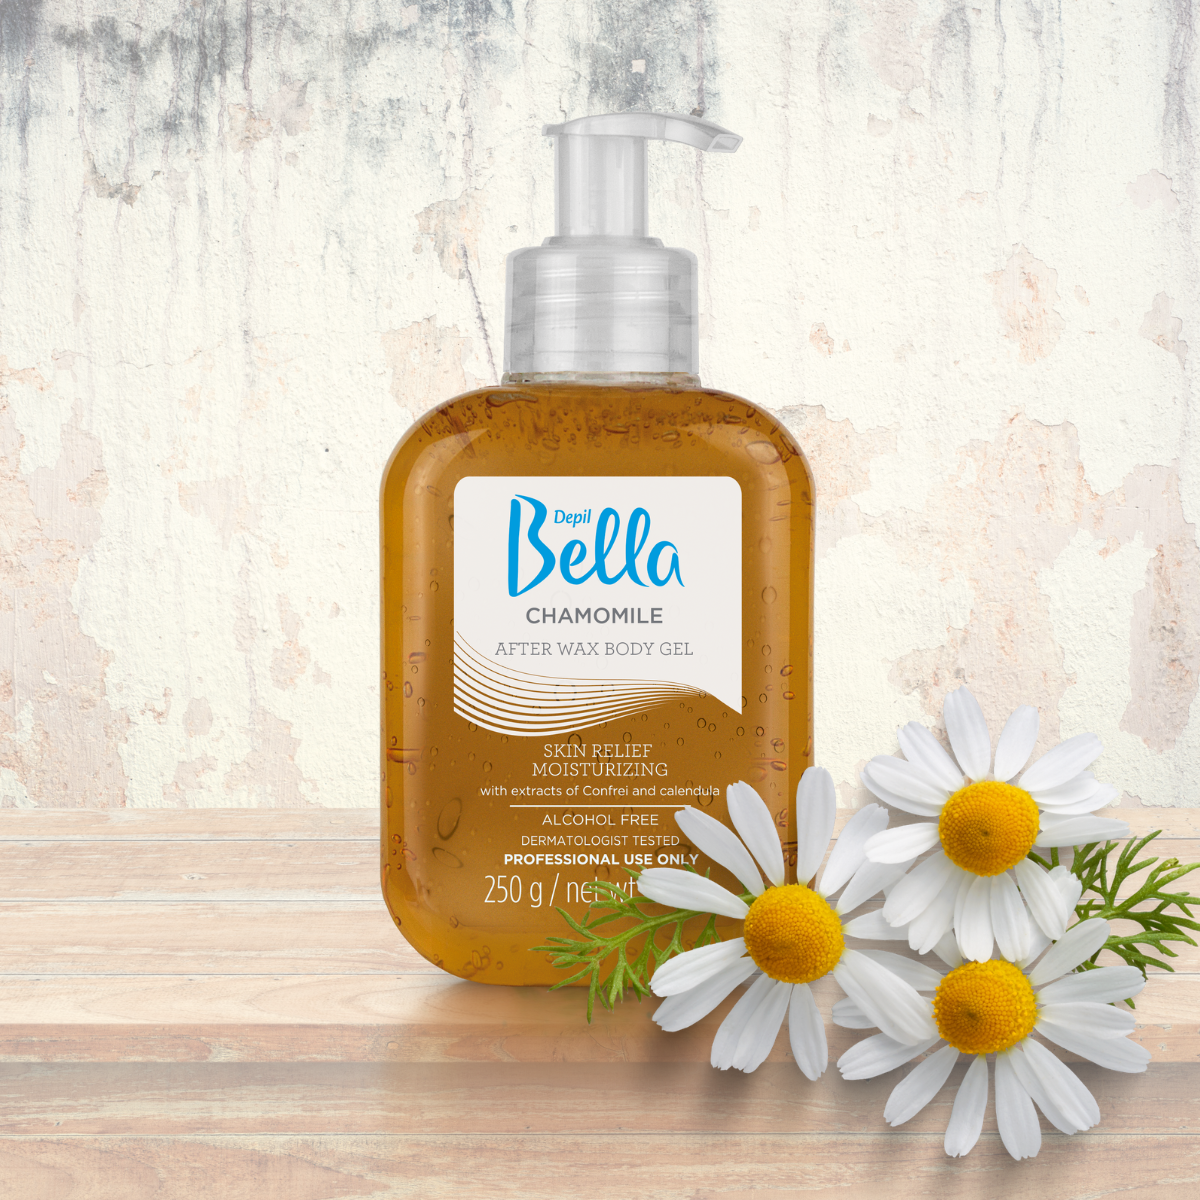 Depil Bella Chamomile Post-Waxing Body Gel 250g - Buy professional cosmetics dedicated to hair removal